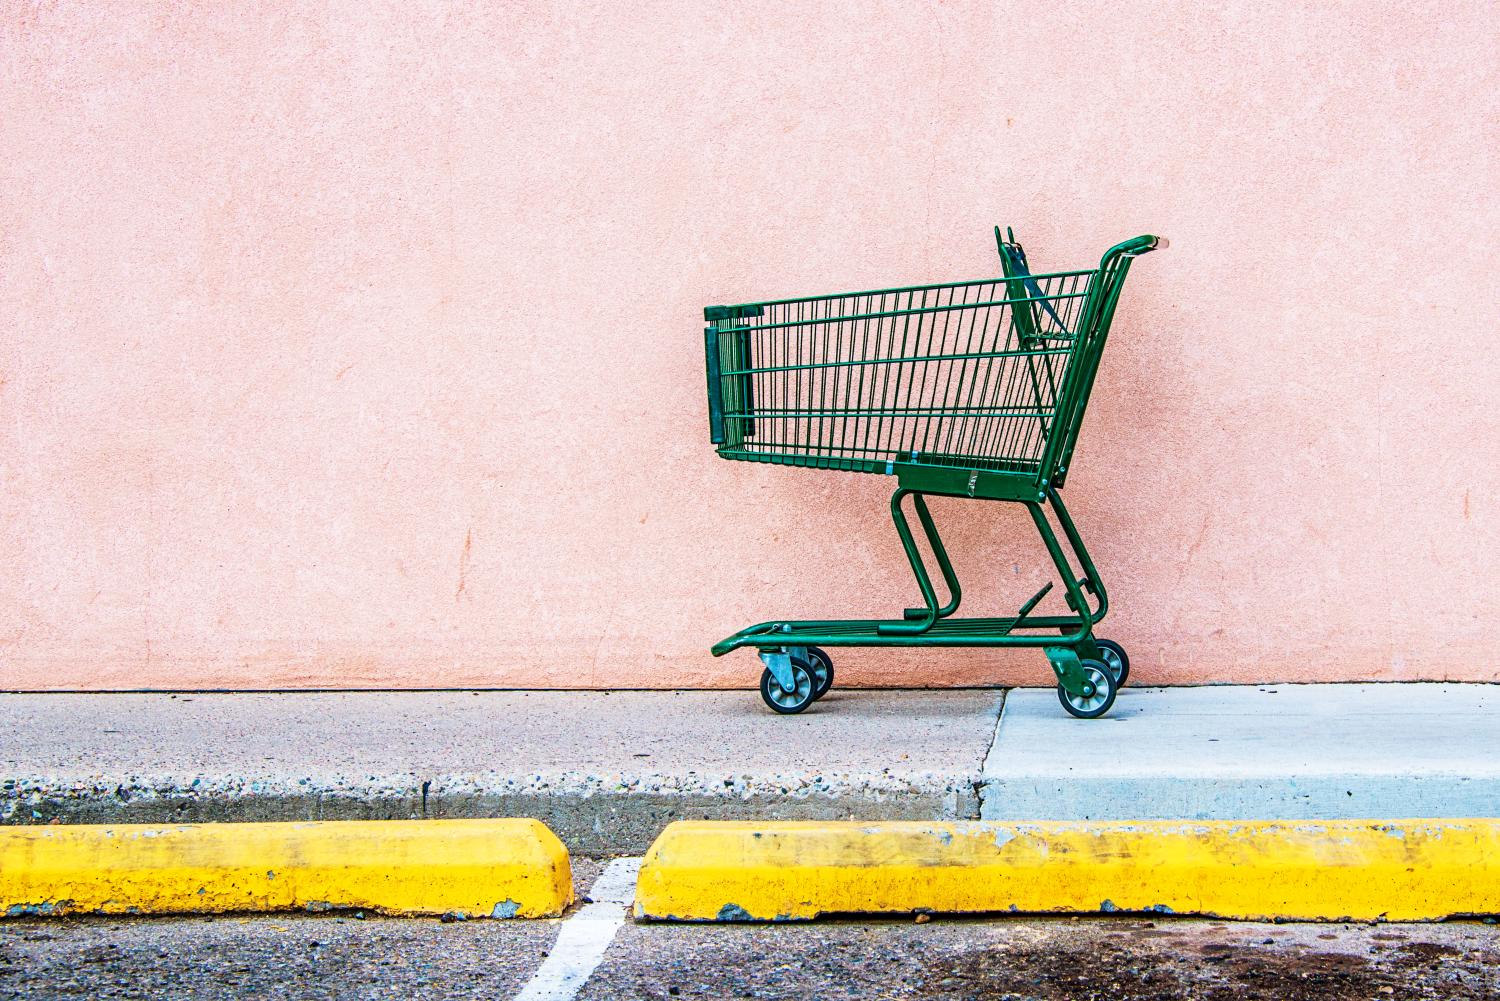 Abandoned Shopping Cart against Pink Wall